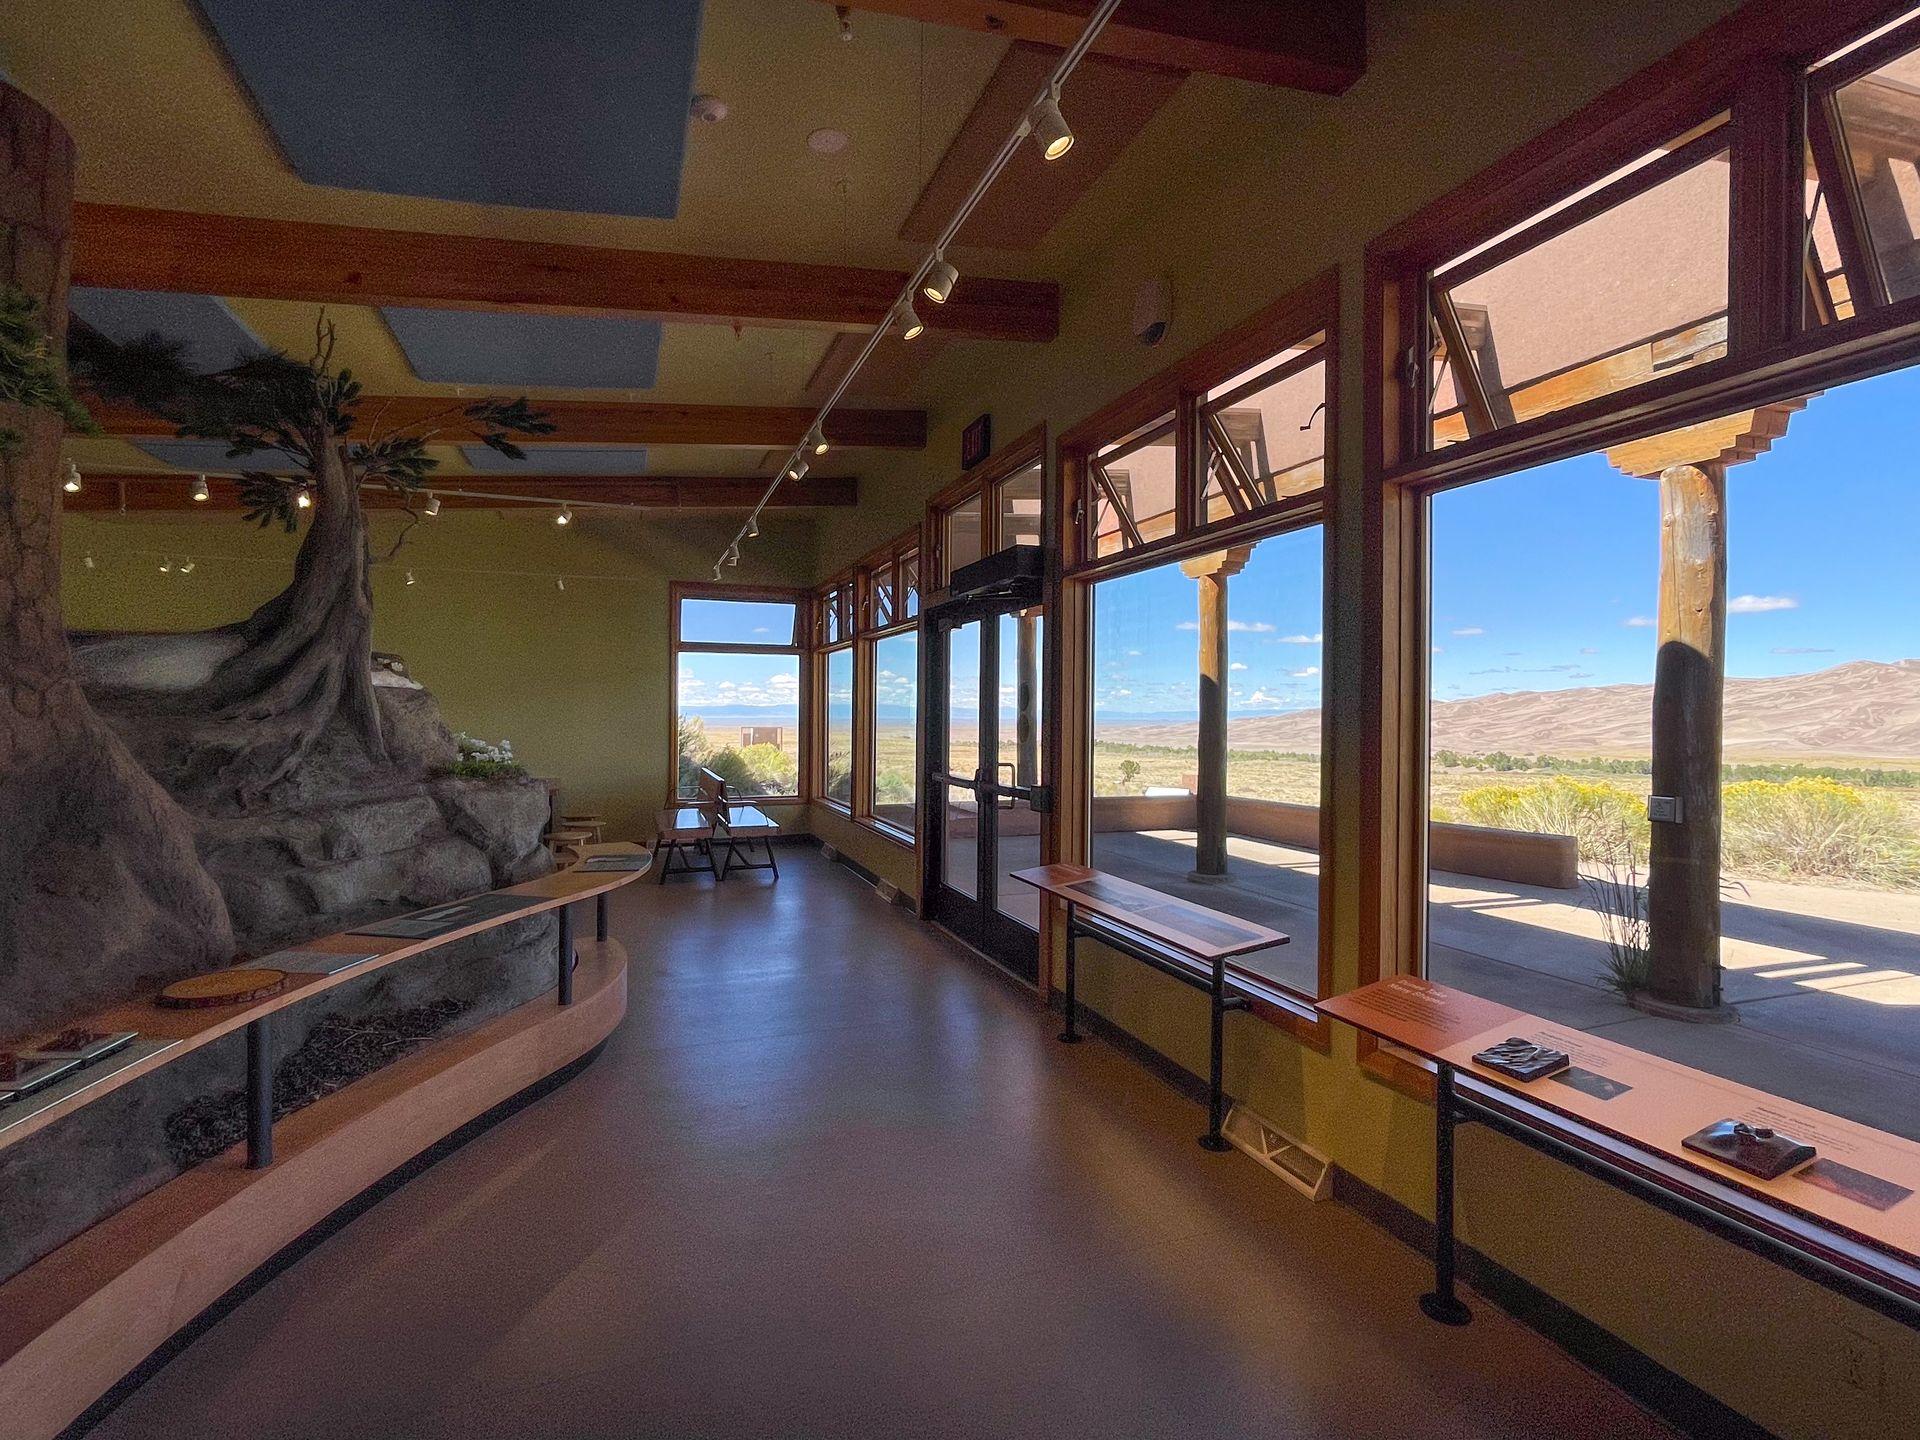 An interior space with signage and displays educating visitors on Great Sand Dunes. You can also see the sand dunes through the window.